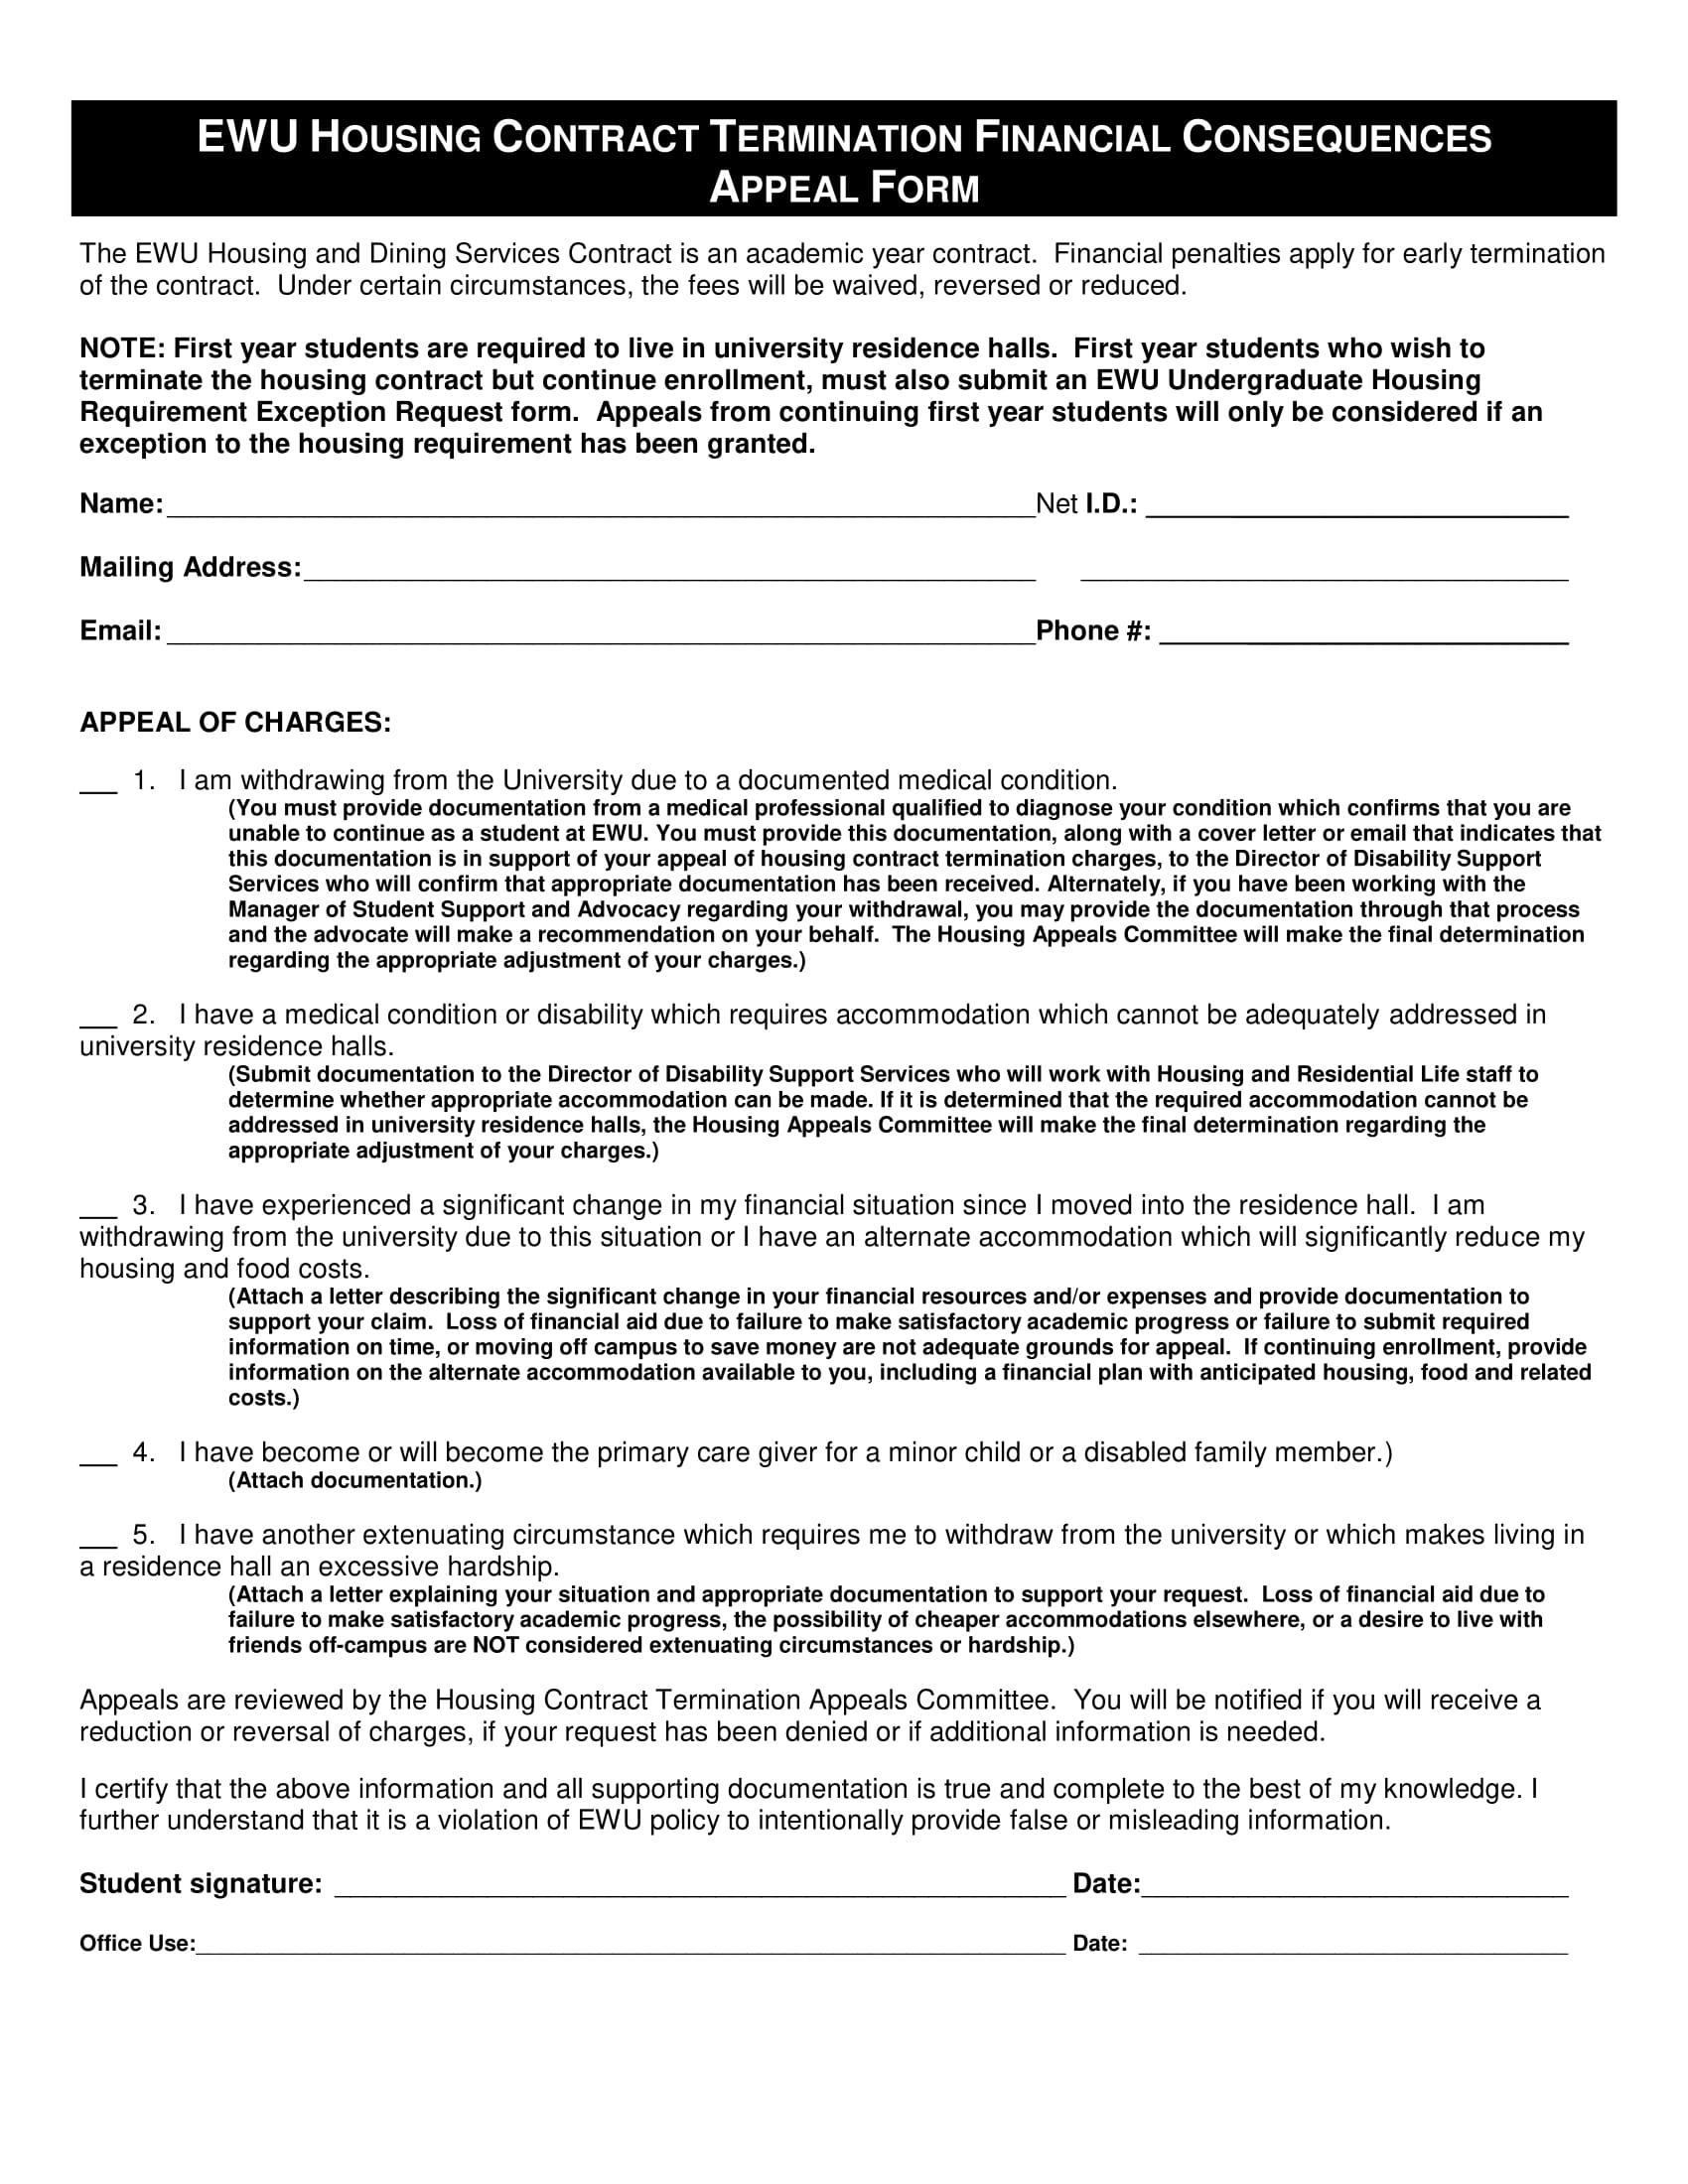 housing contract appeal form sample 1